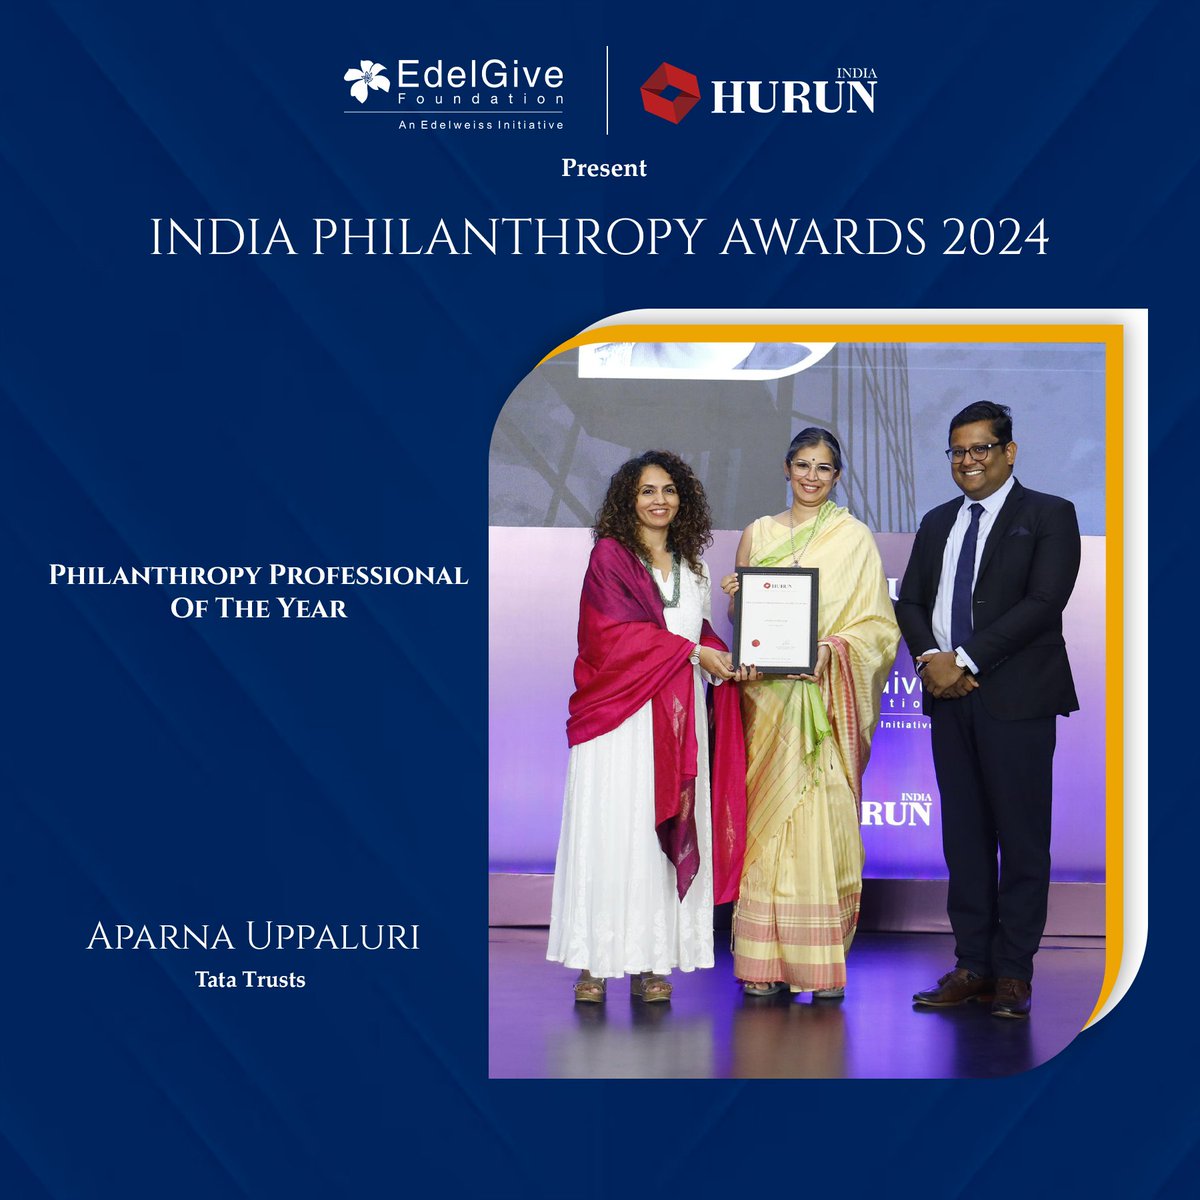 Aparna Uppaluri , Tata Trusts receiving the Philanthropy Professional Of The Year. #IndiaPhilanthropyAwards2024 #PhilanthropyIndia #GivingBackIndia #CelebrateGiving #IndiaGives #IPALive #HonoringHeroes #SocialImpactIndia